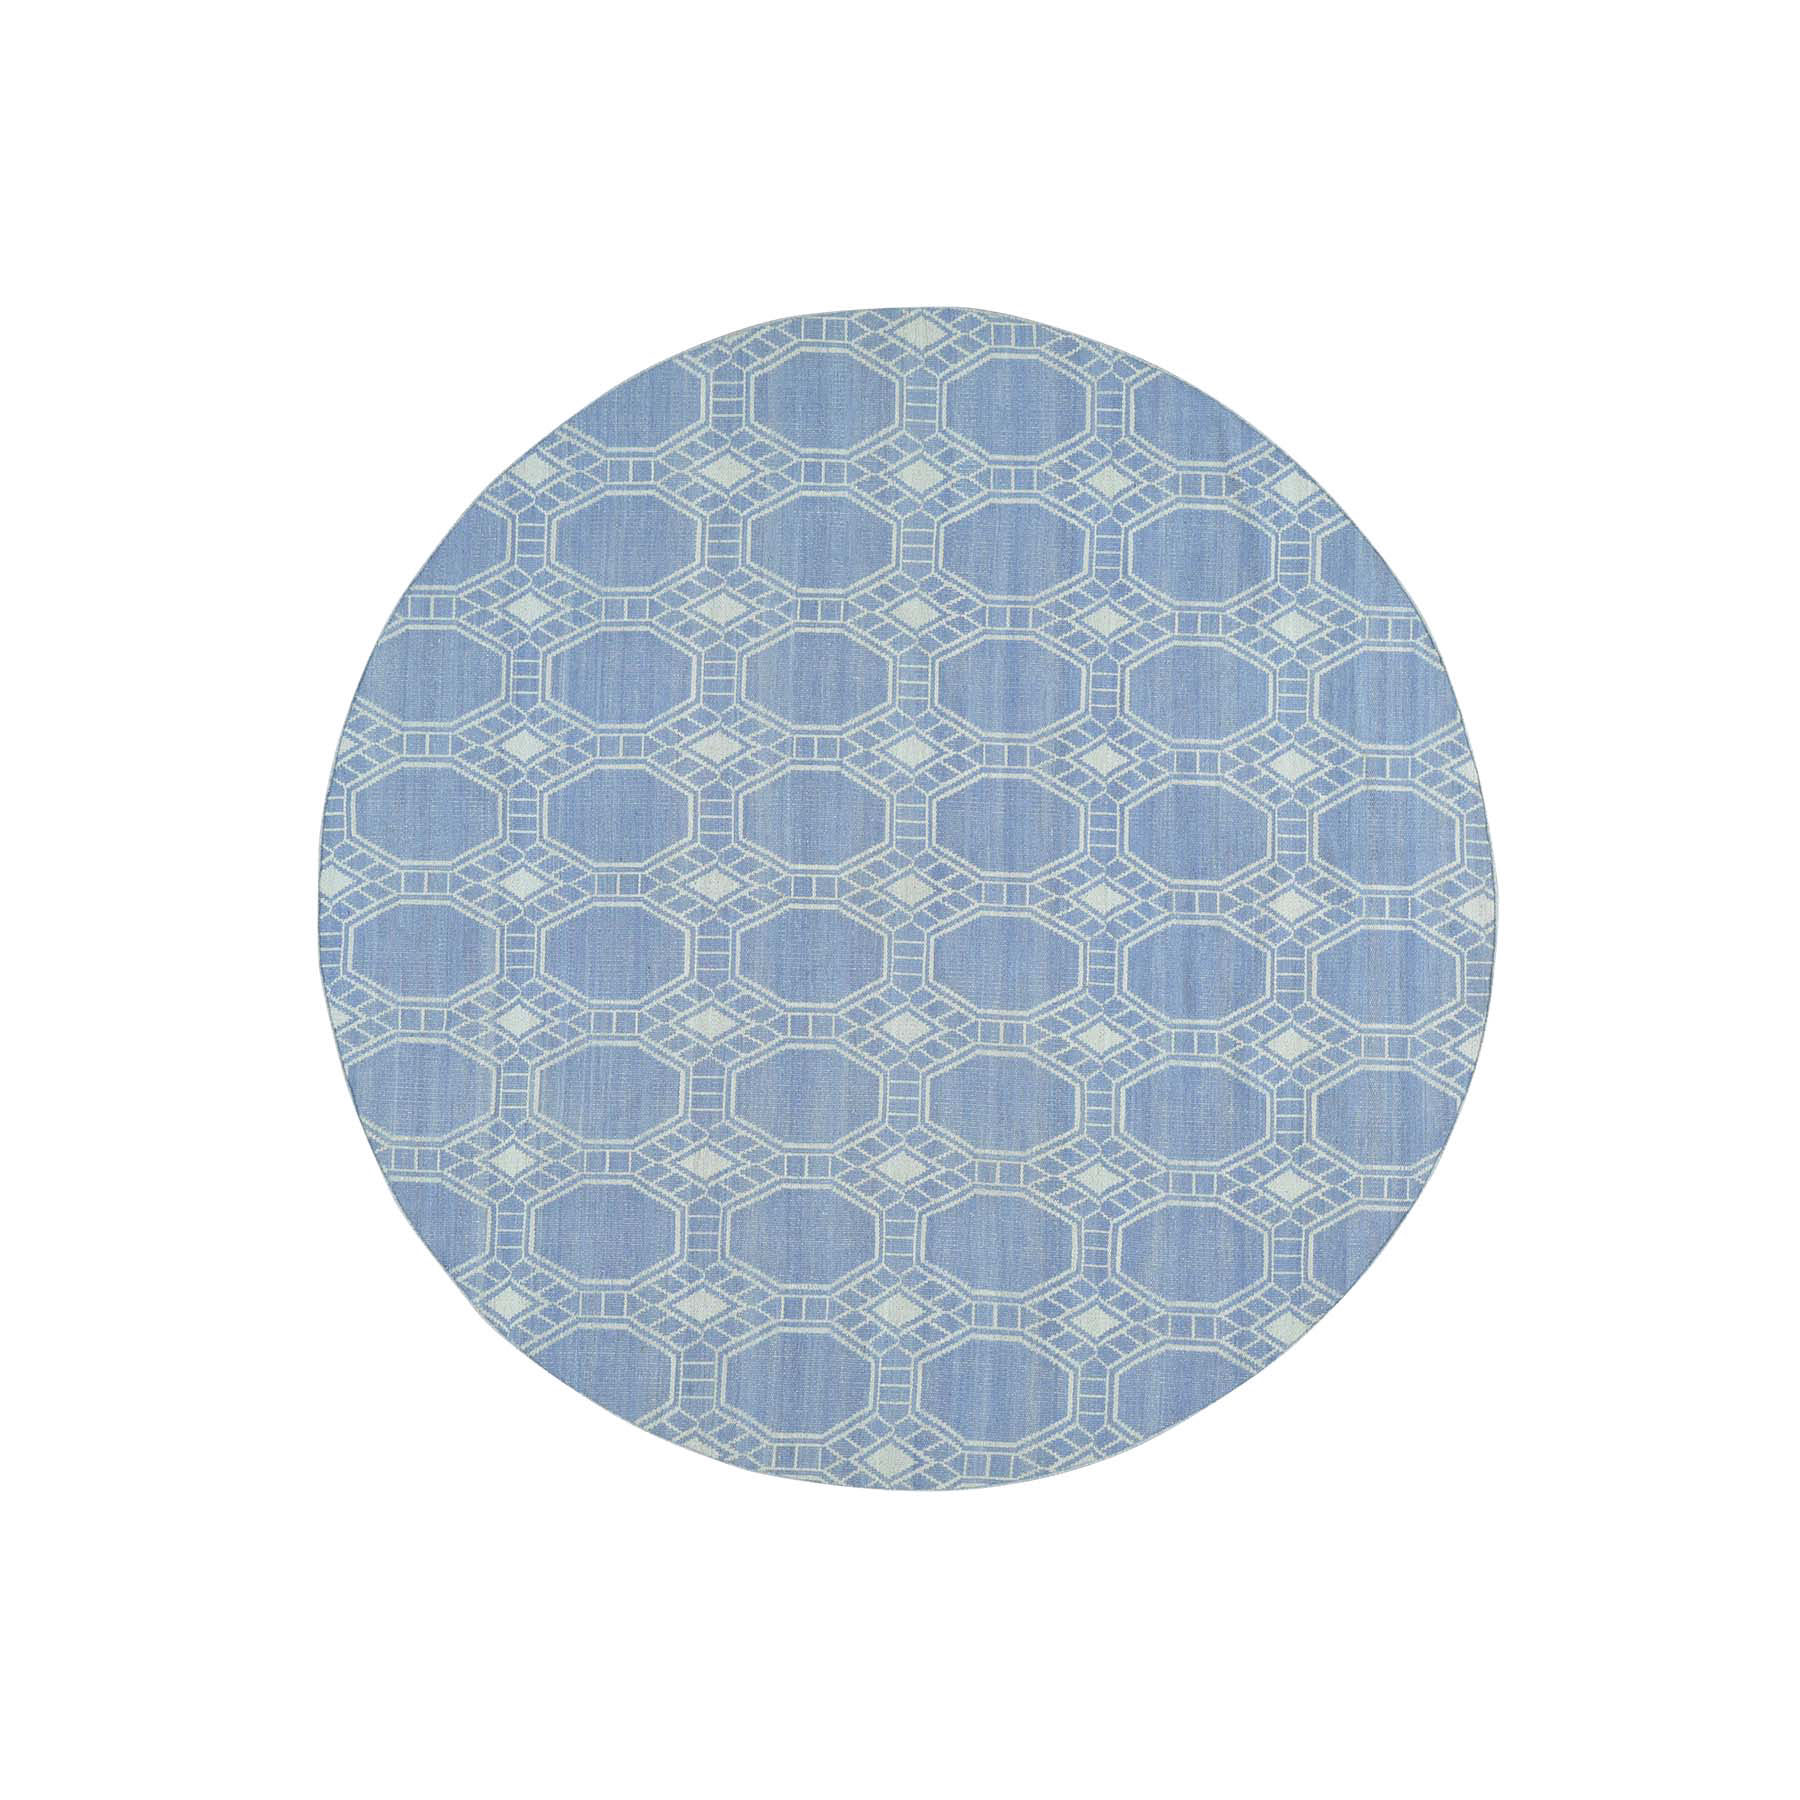 6-x6- Hand-Woven Flat Weave Reversible Durie Kilim Round Rug 